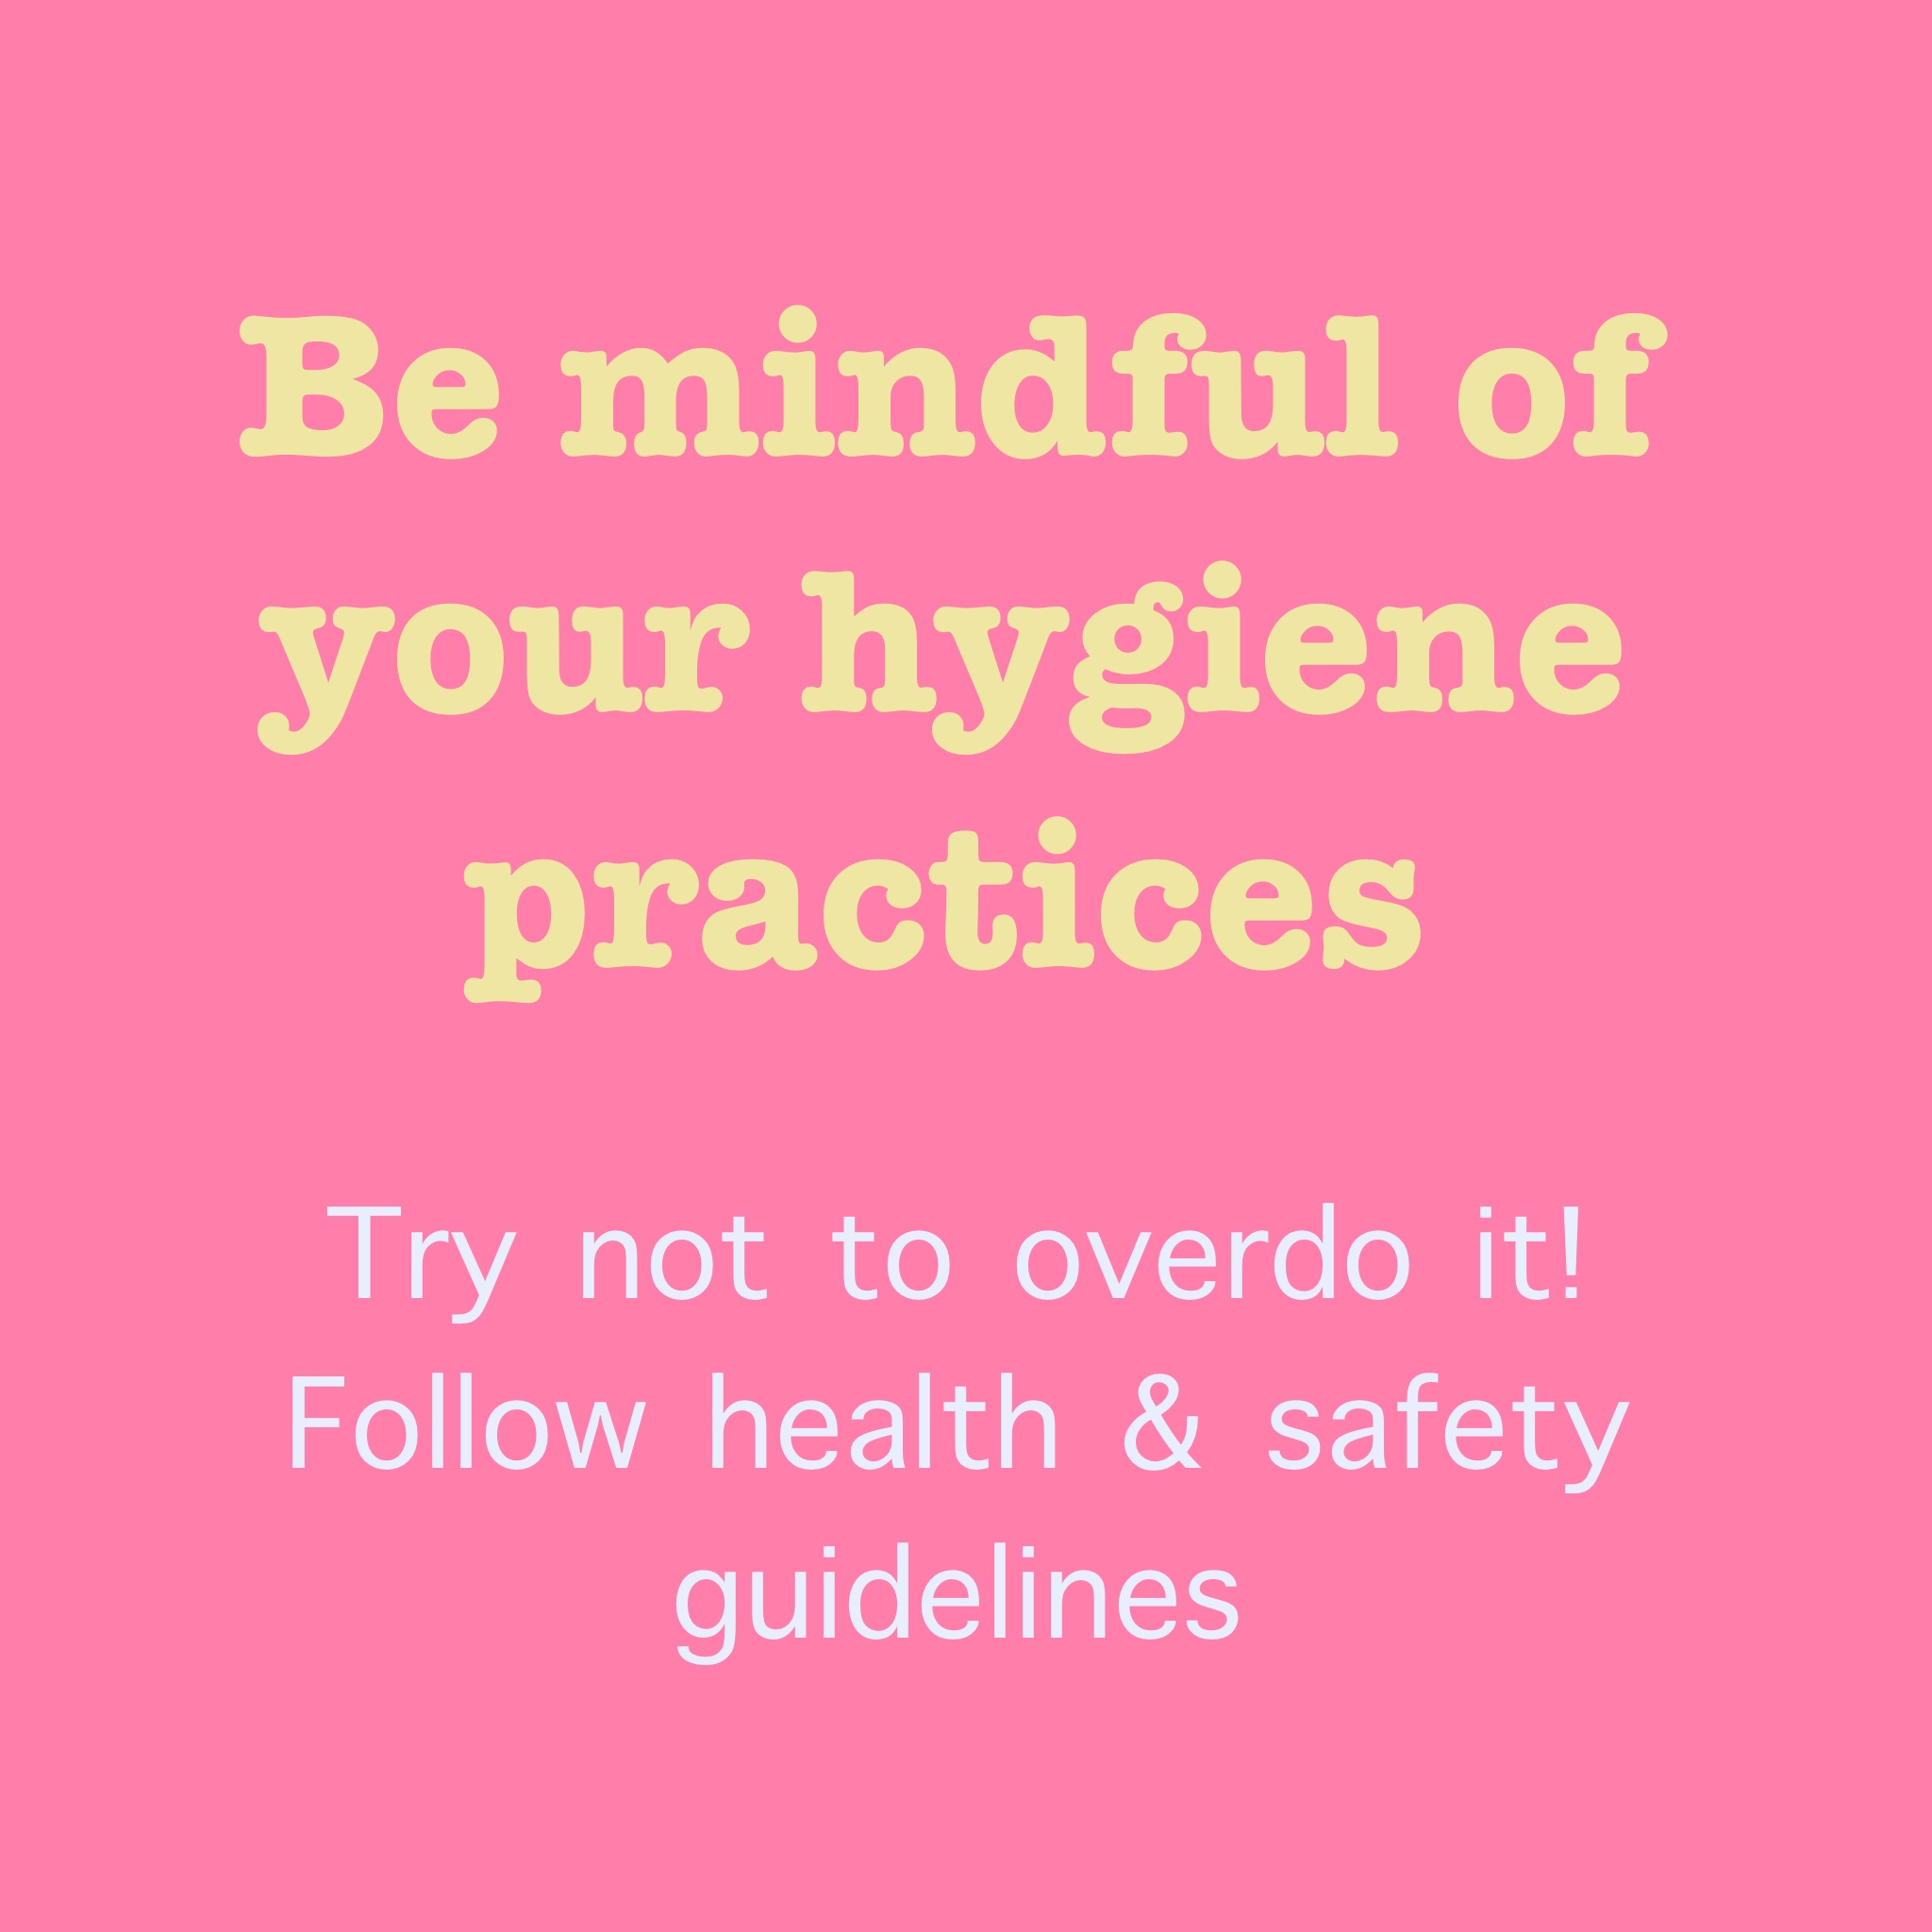 TEXT: Be mindful of your hygiene practices